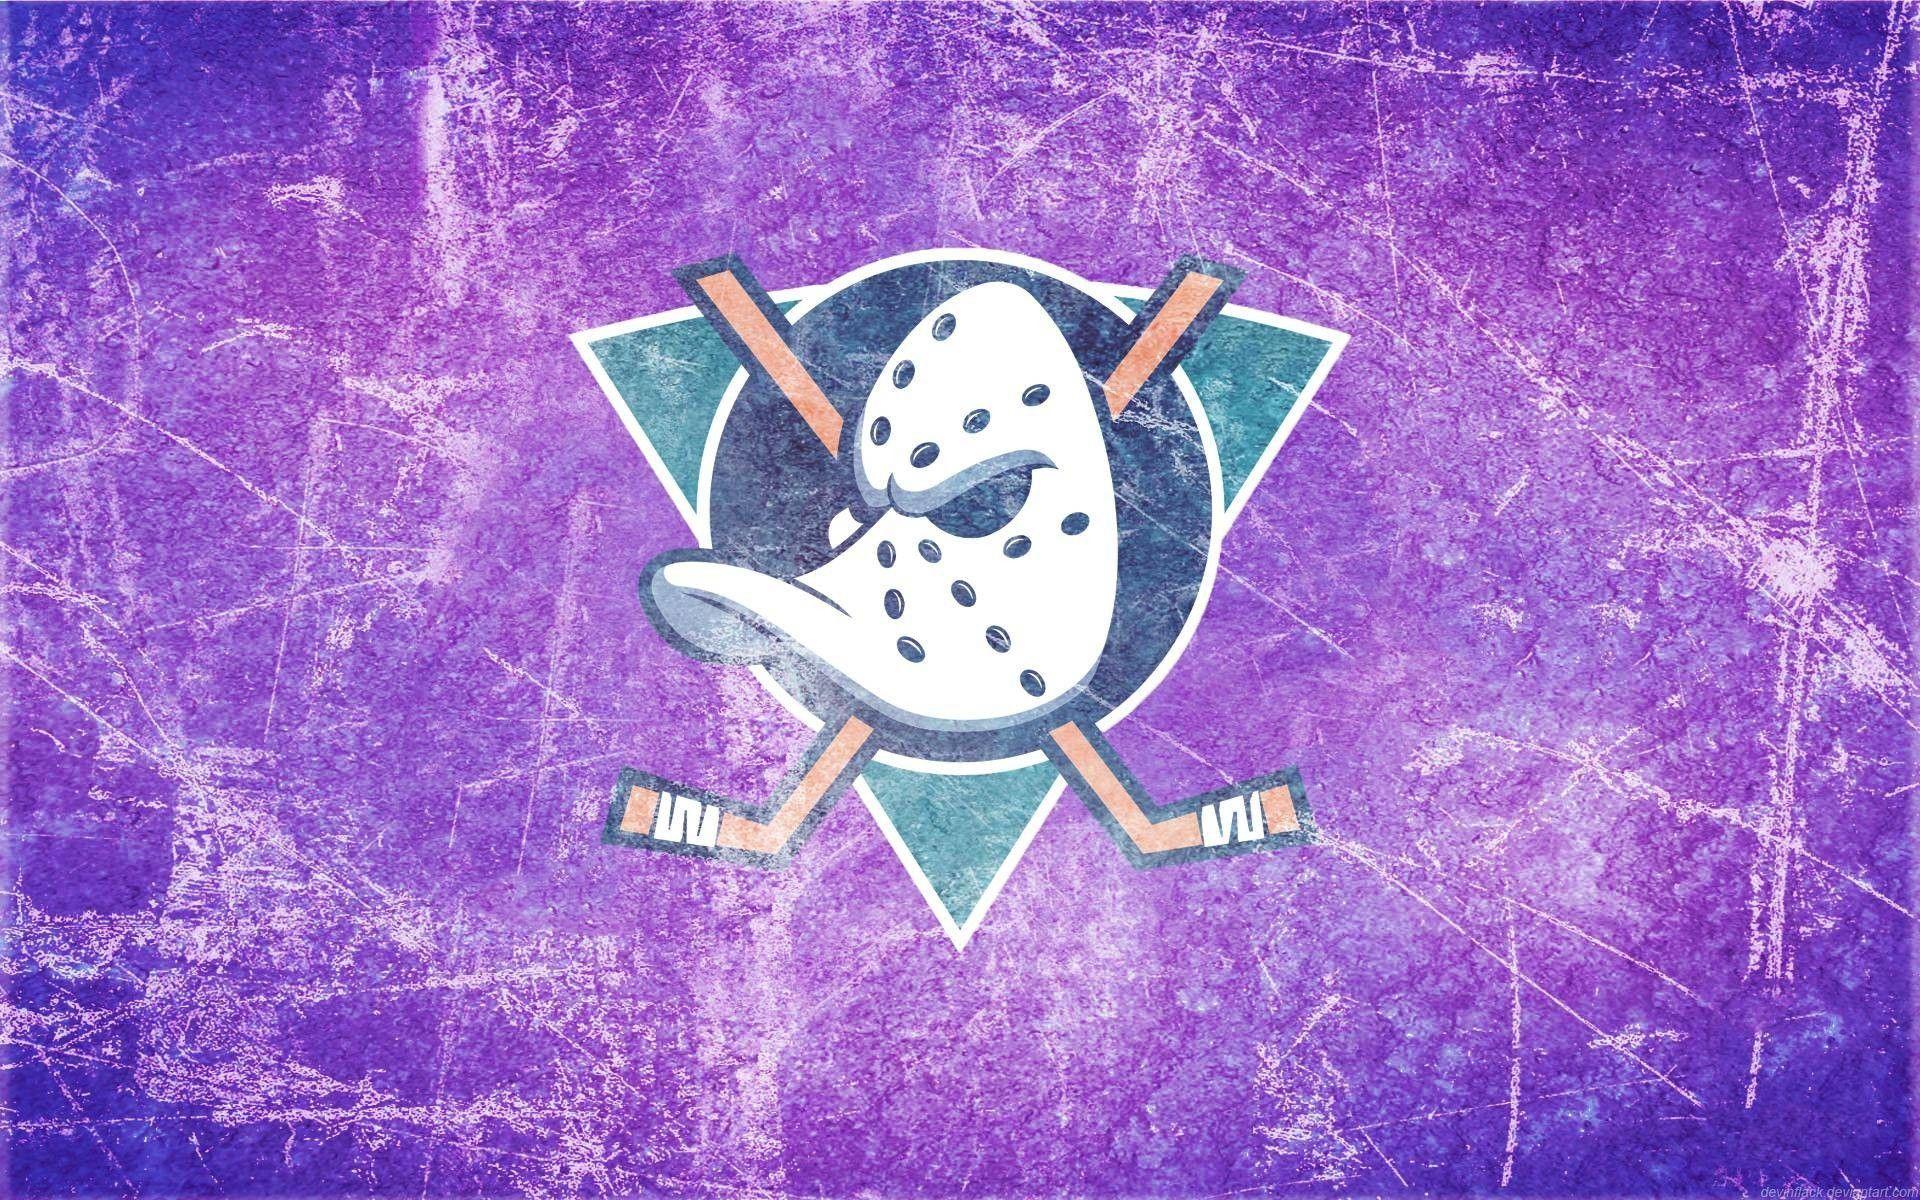 Anaheim Mighty Ducks Wallpapers Iphone - Wallpaper Cave